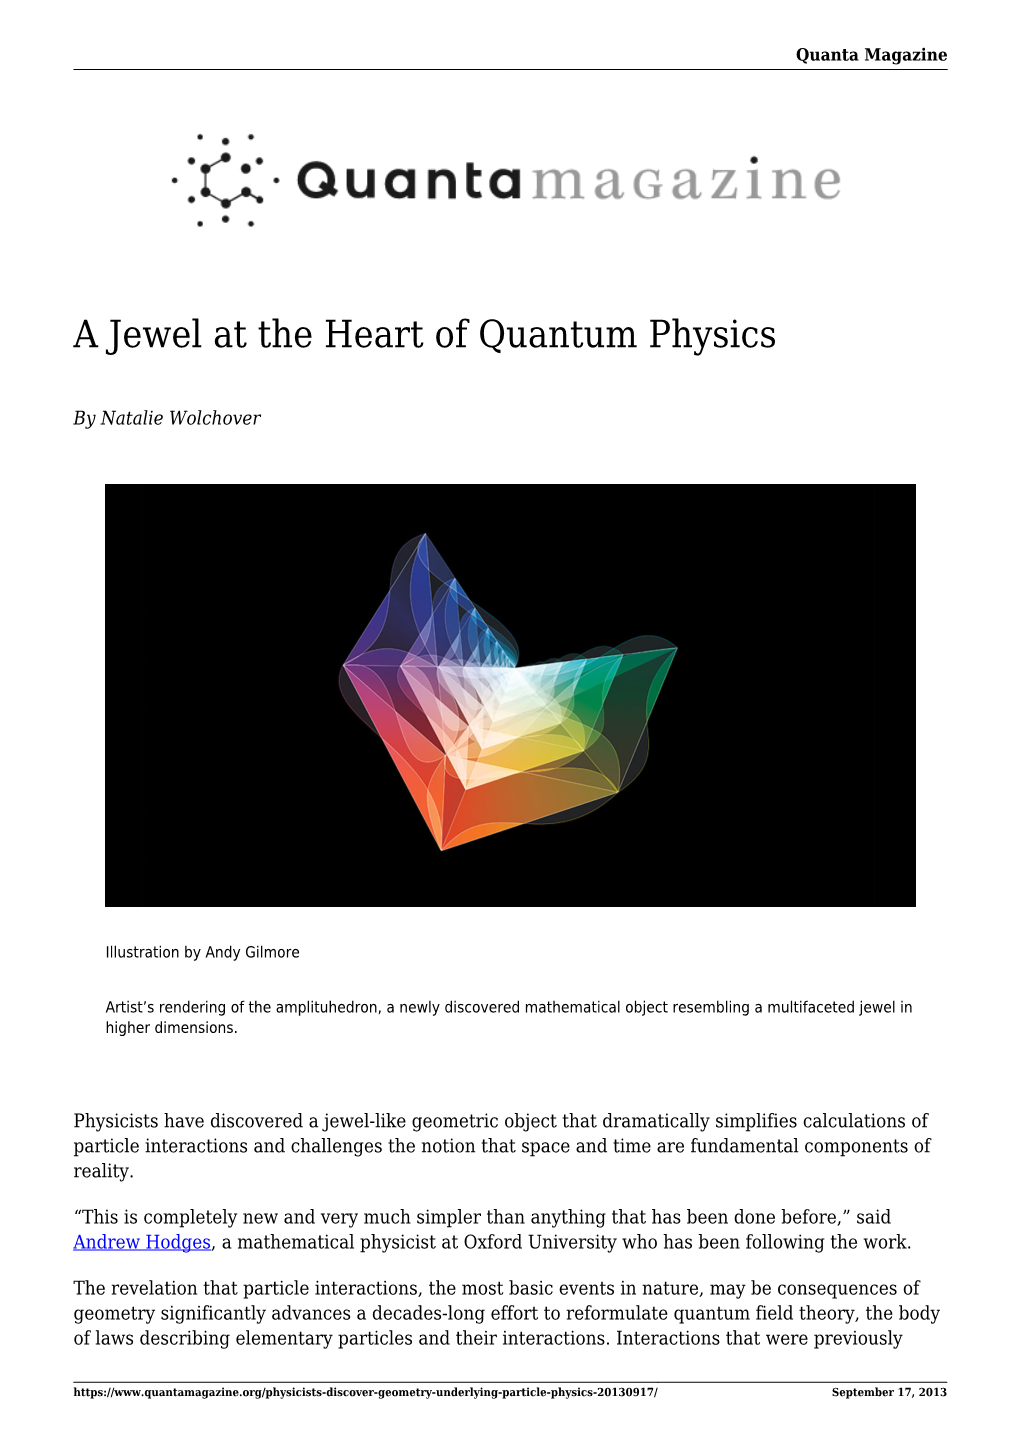 A Jewel at the Heart of Quantum Physics